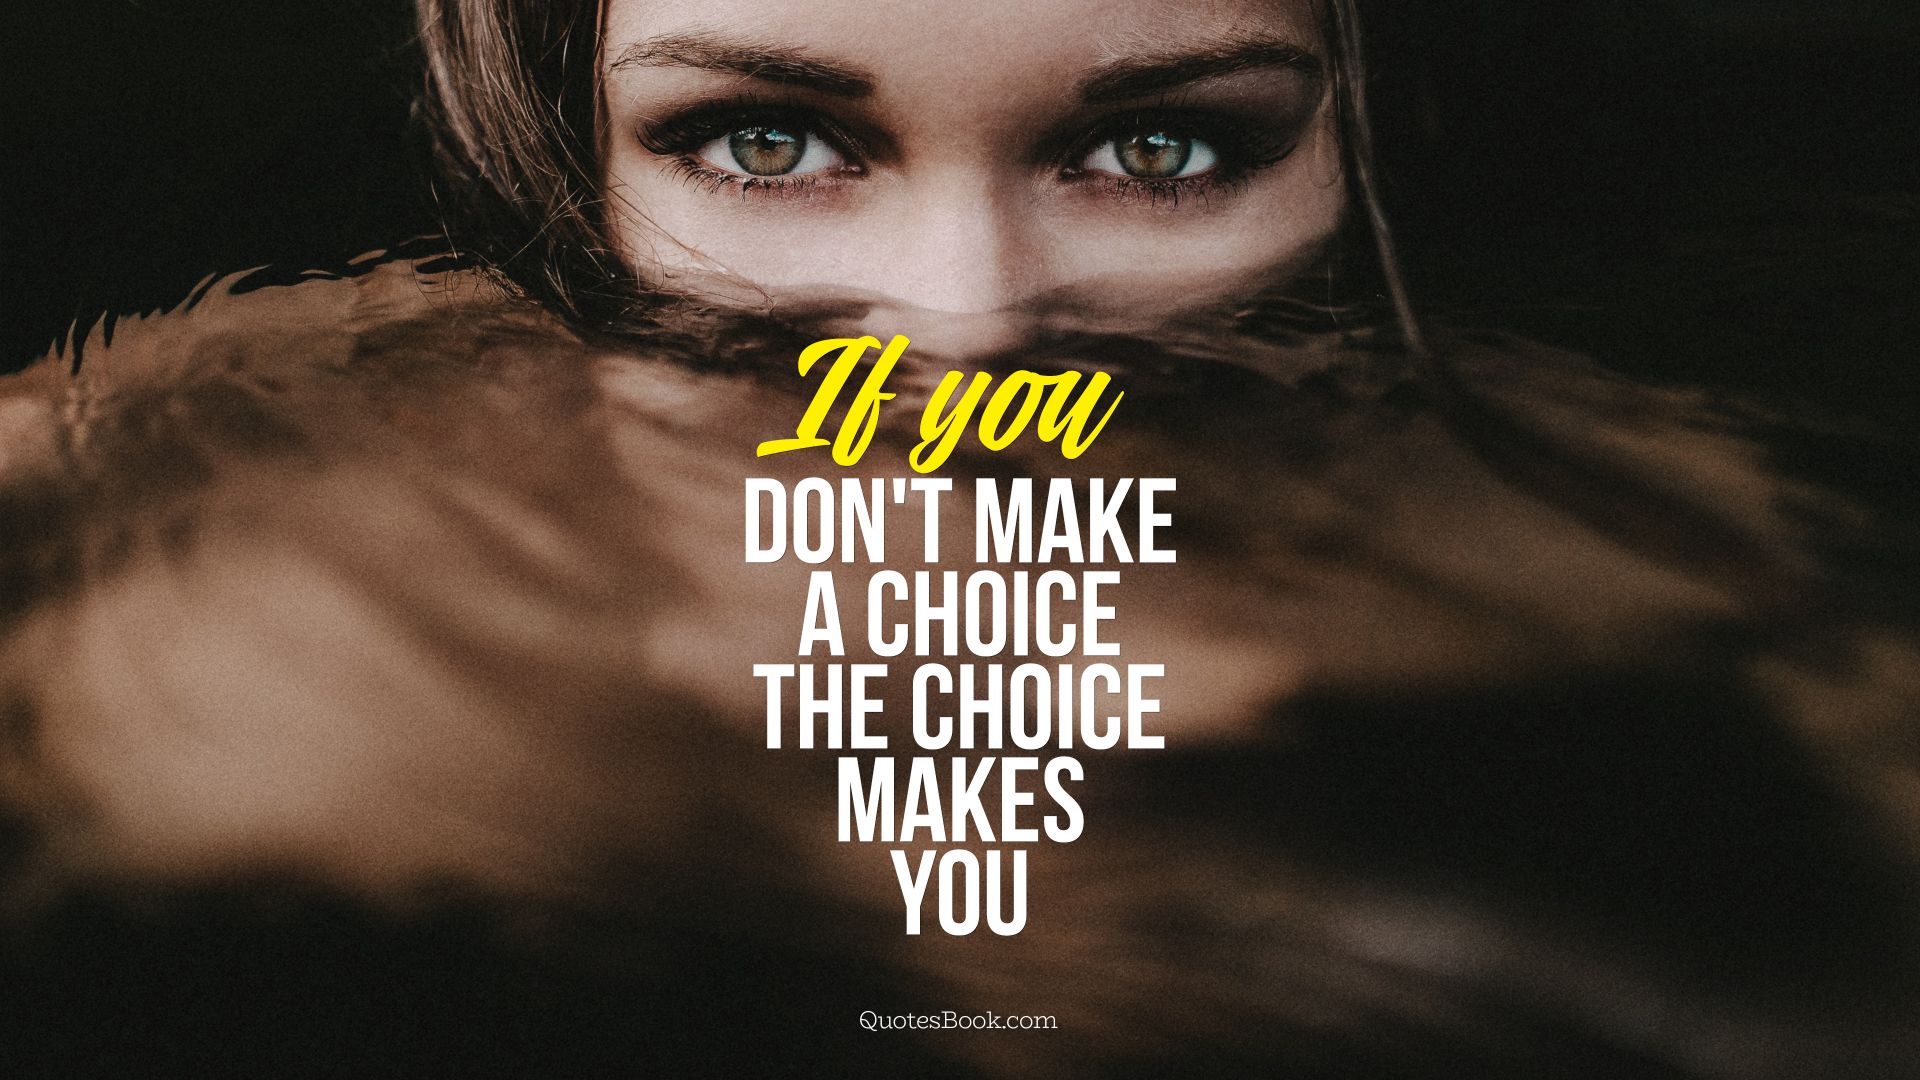 If you don't make a choice the choice makes you